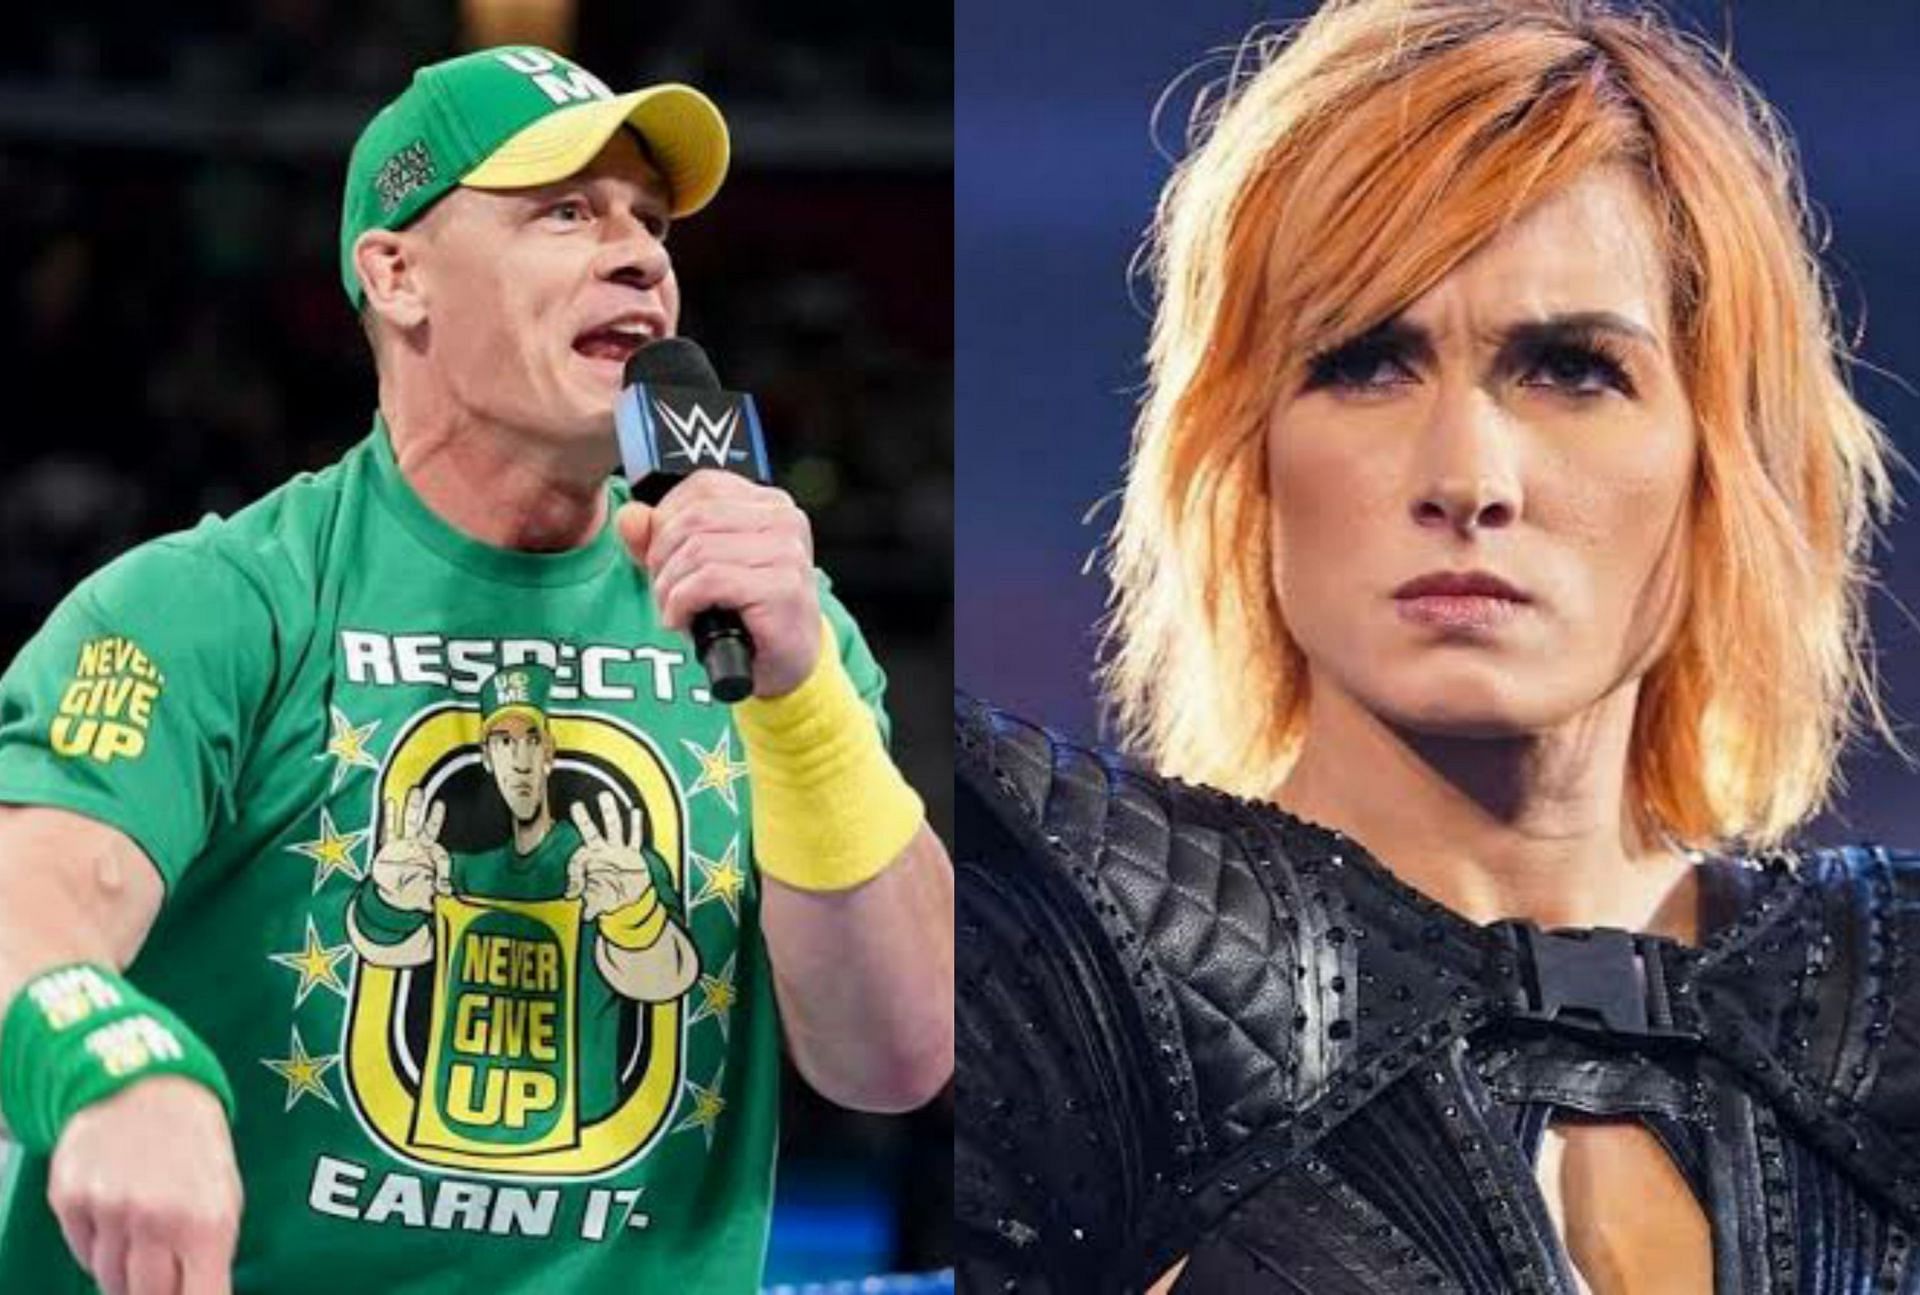 Some mouth-watering feuds could be in store for the fans following Money in the Bank 2022